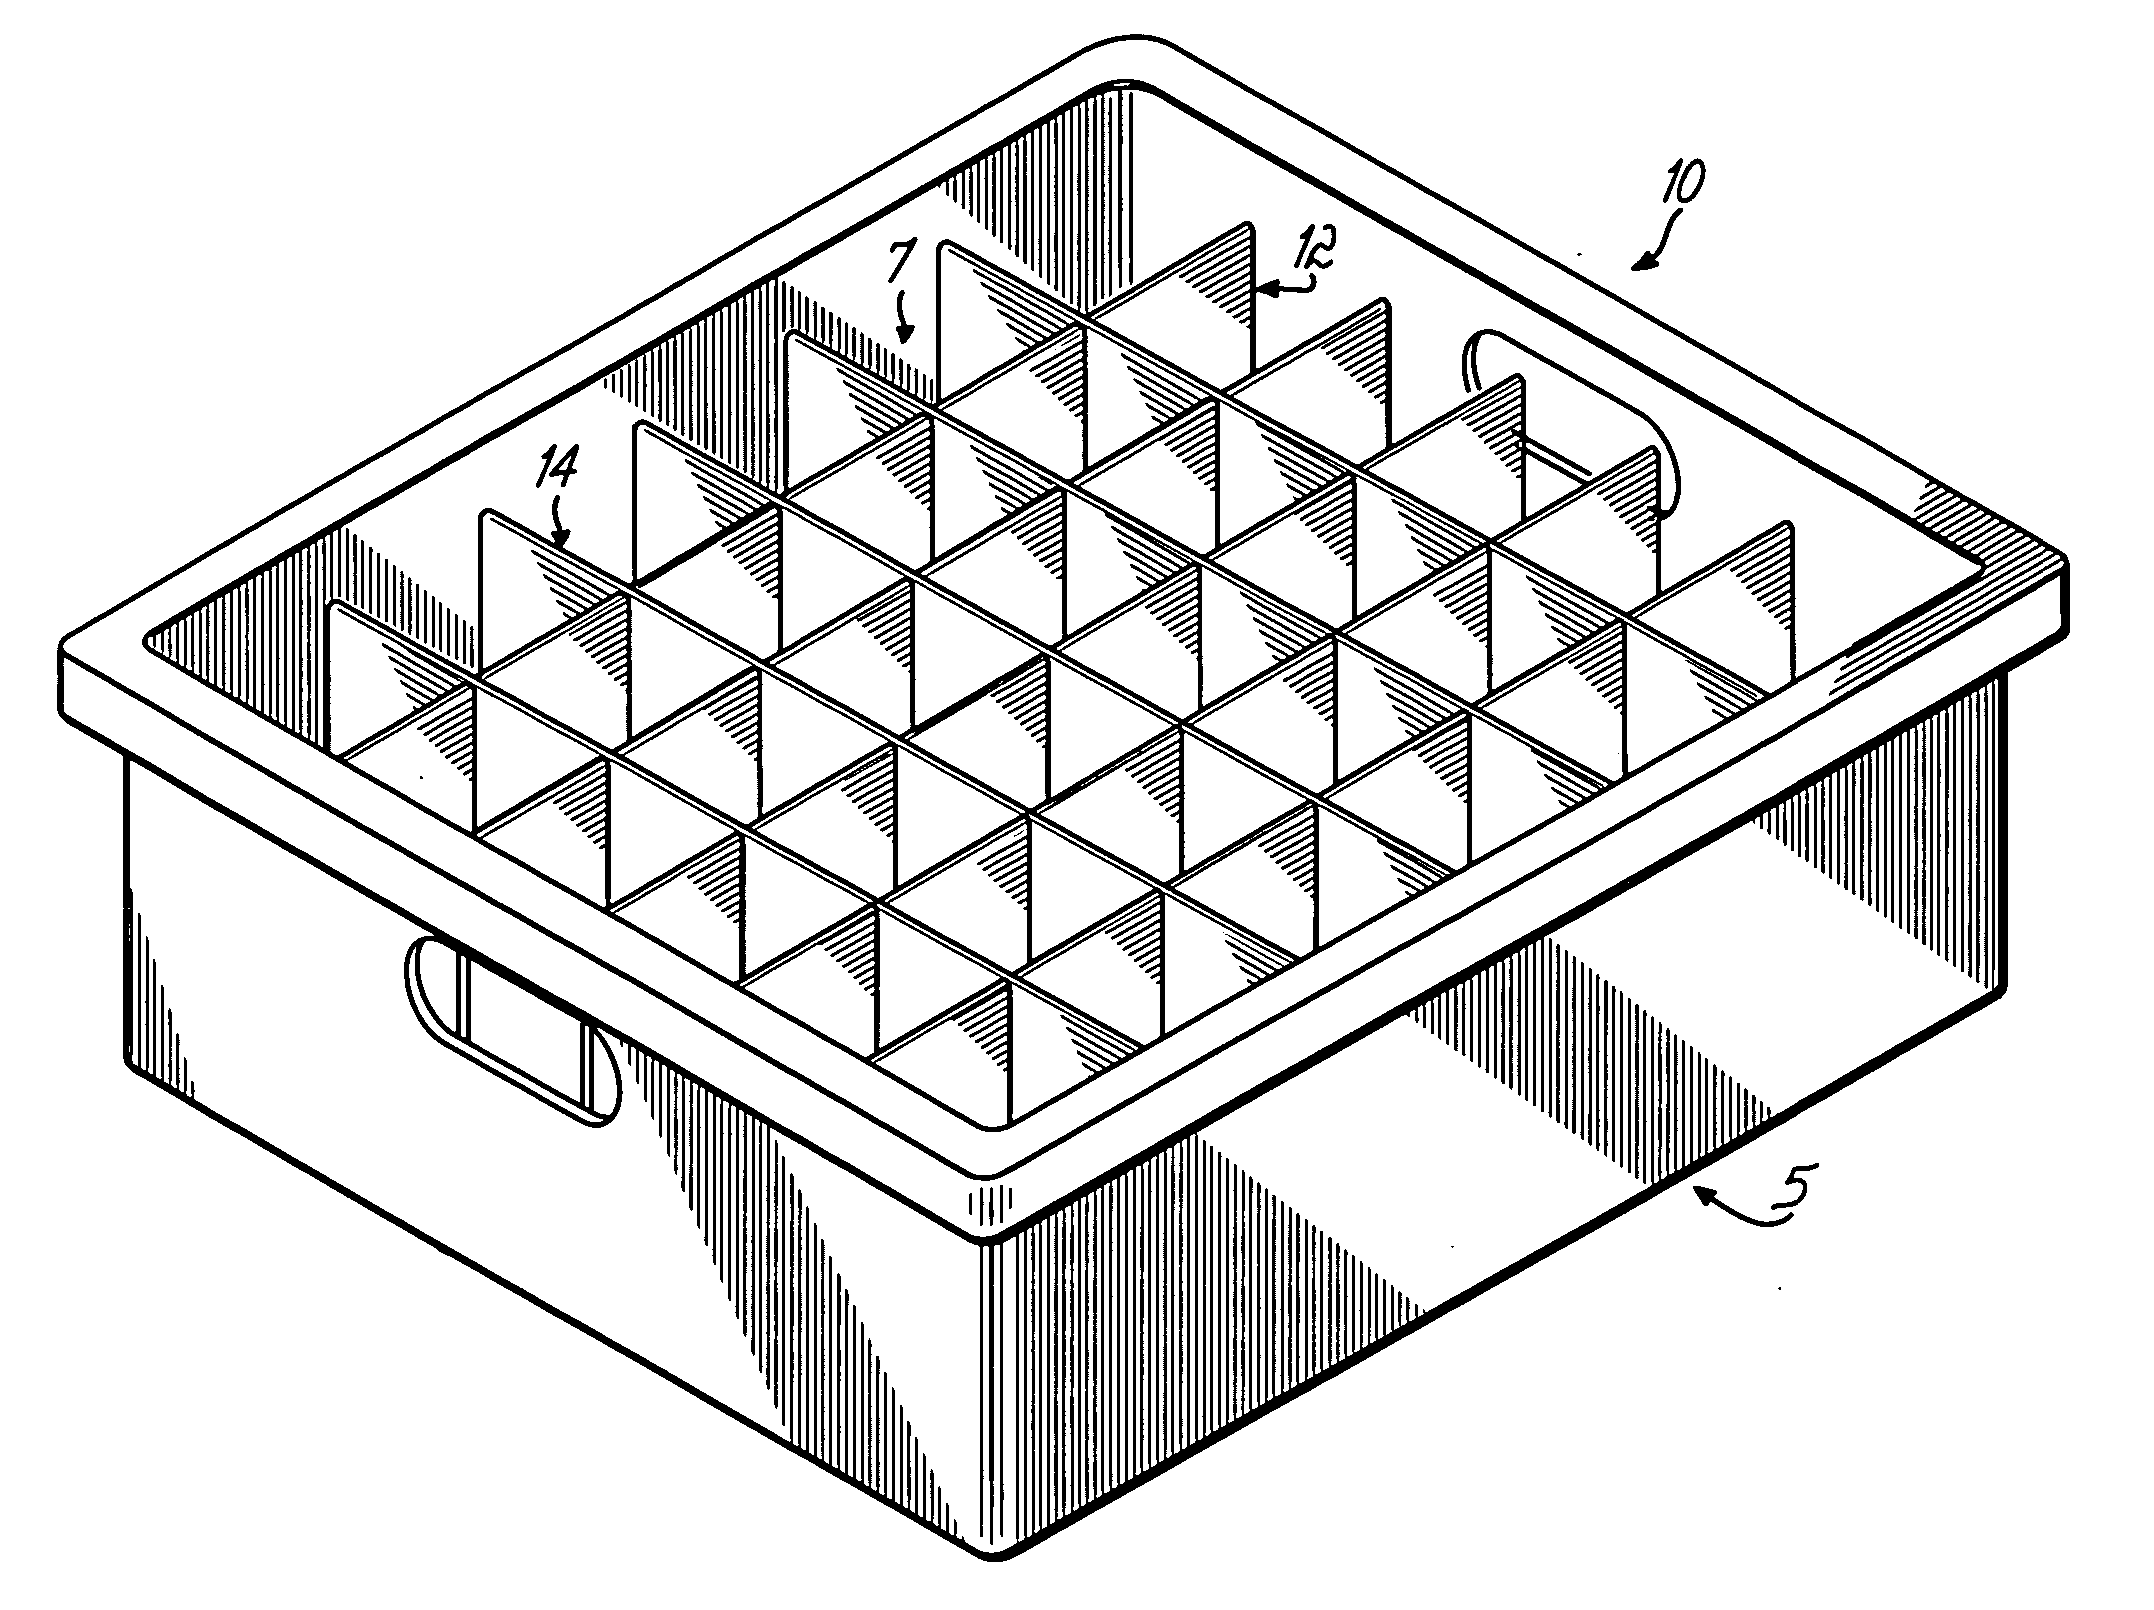 Partition assembly made with multiple ply partitions